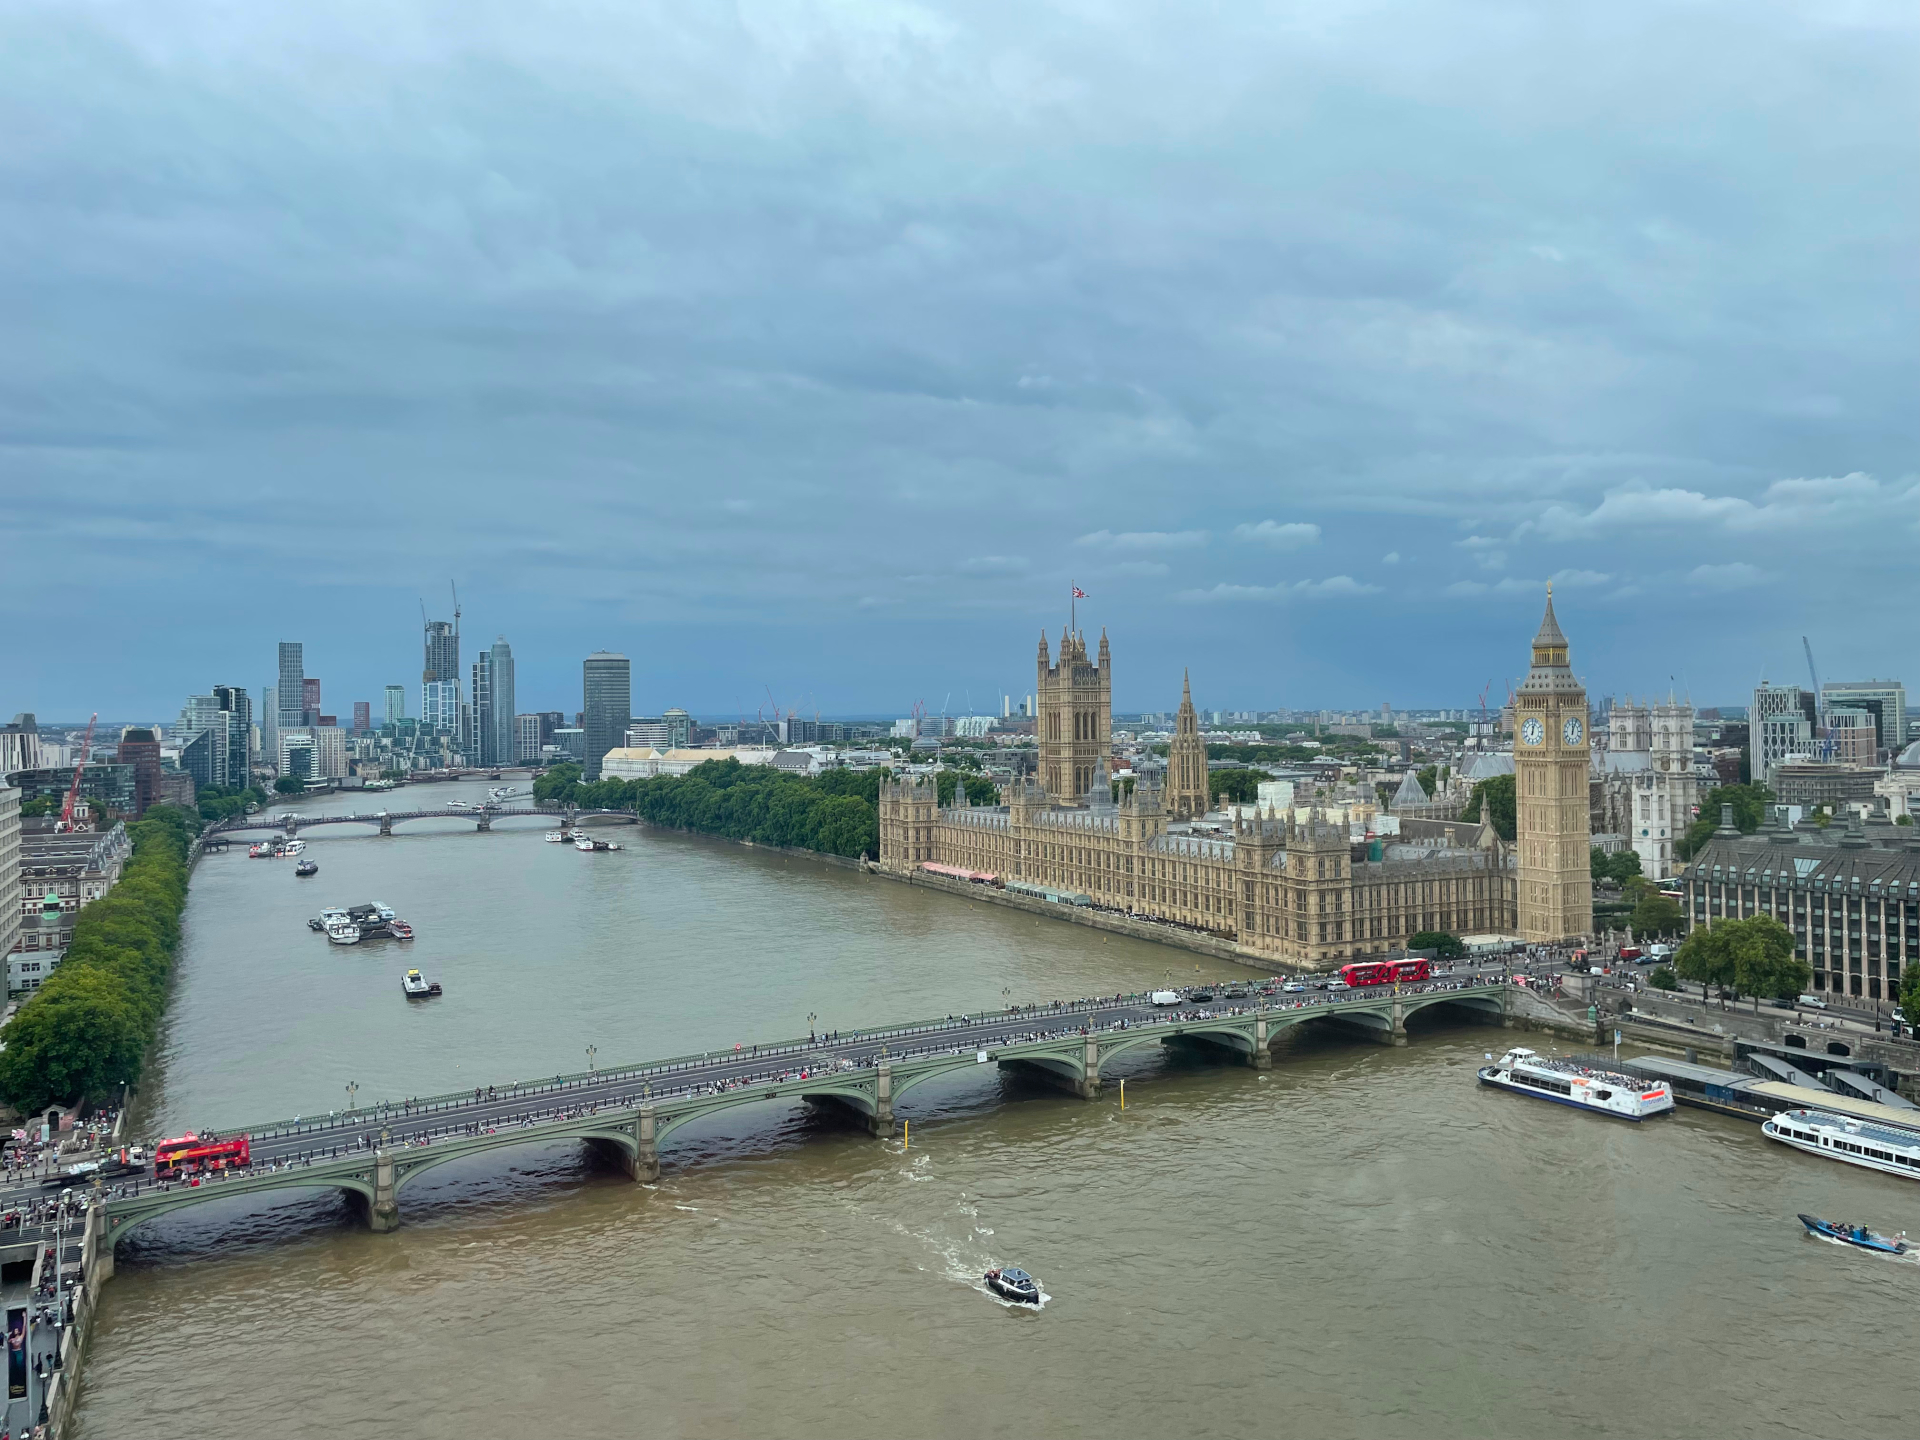 View of Westminster and River Thames